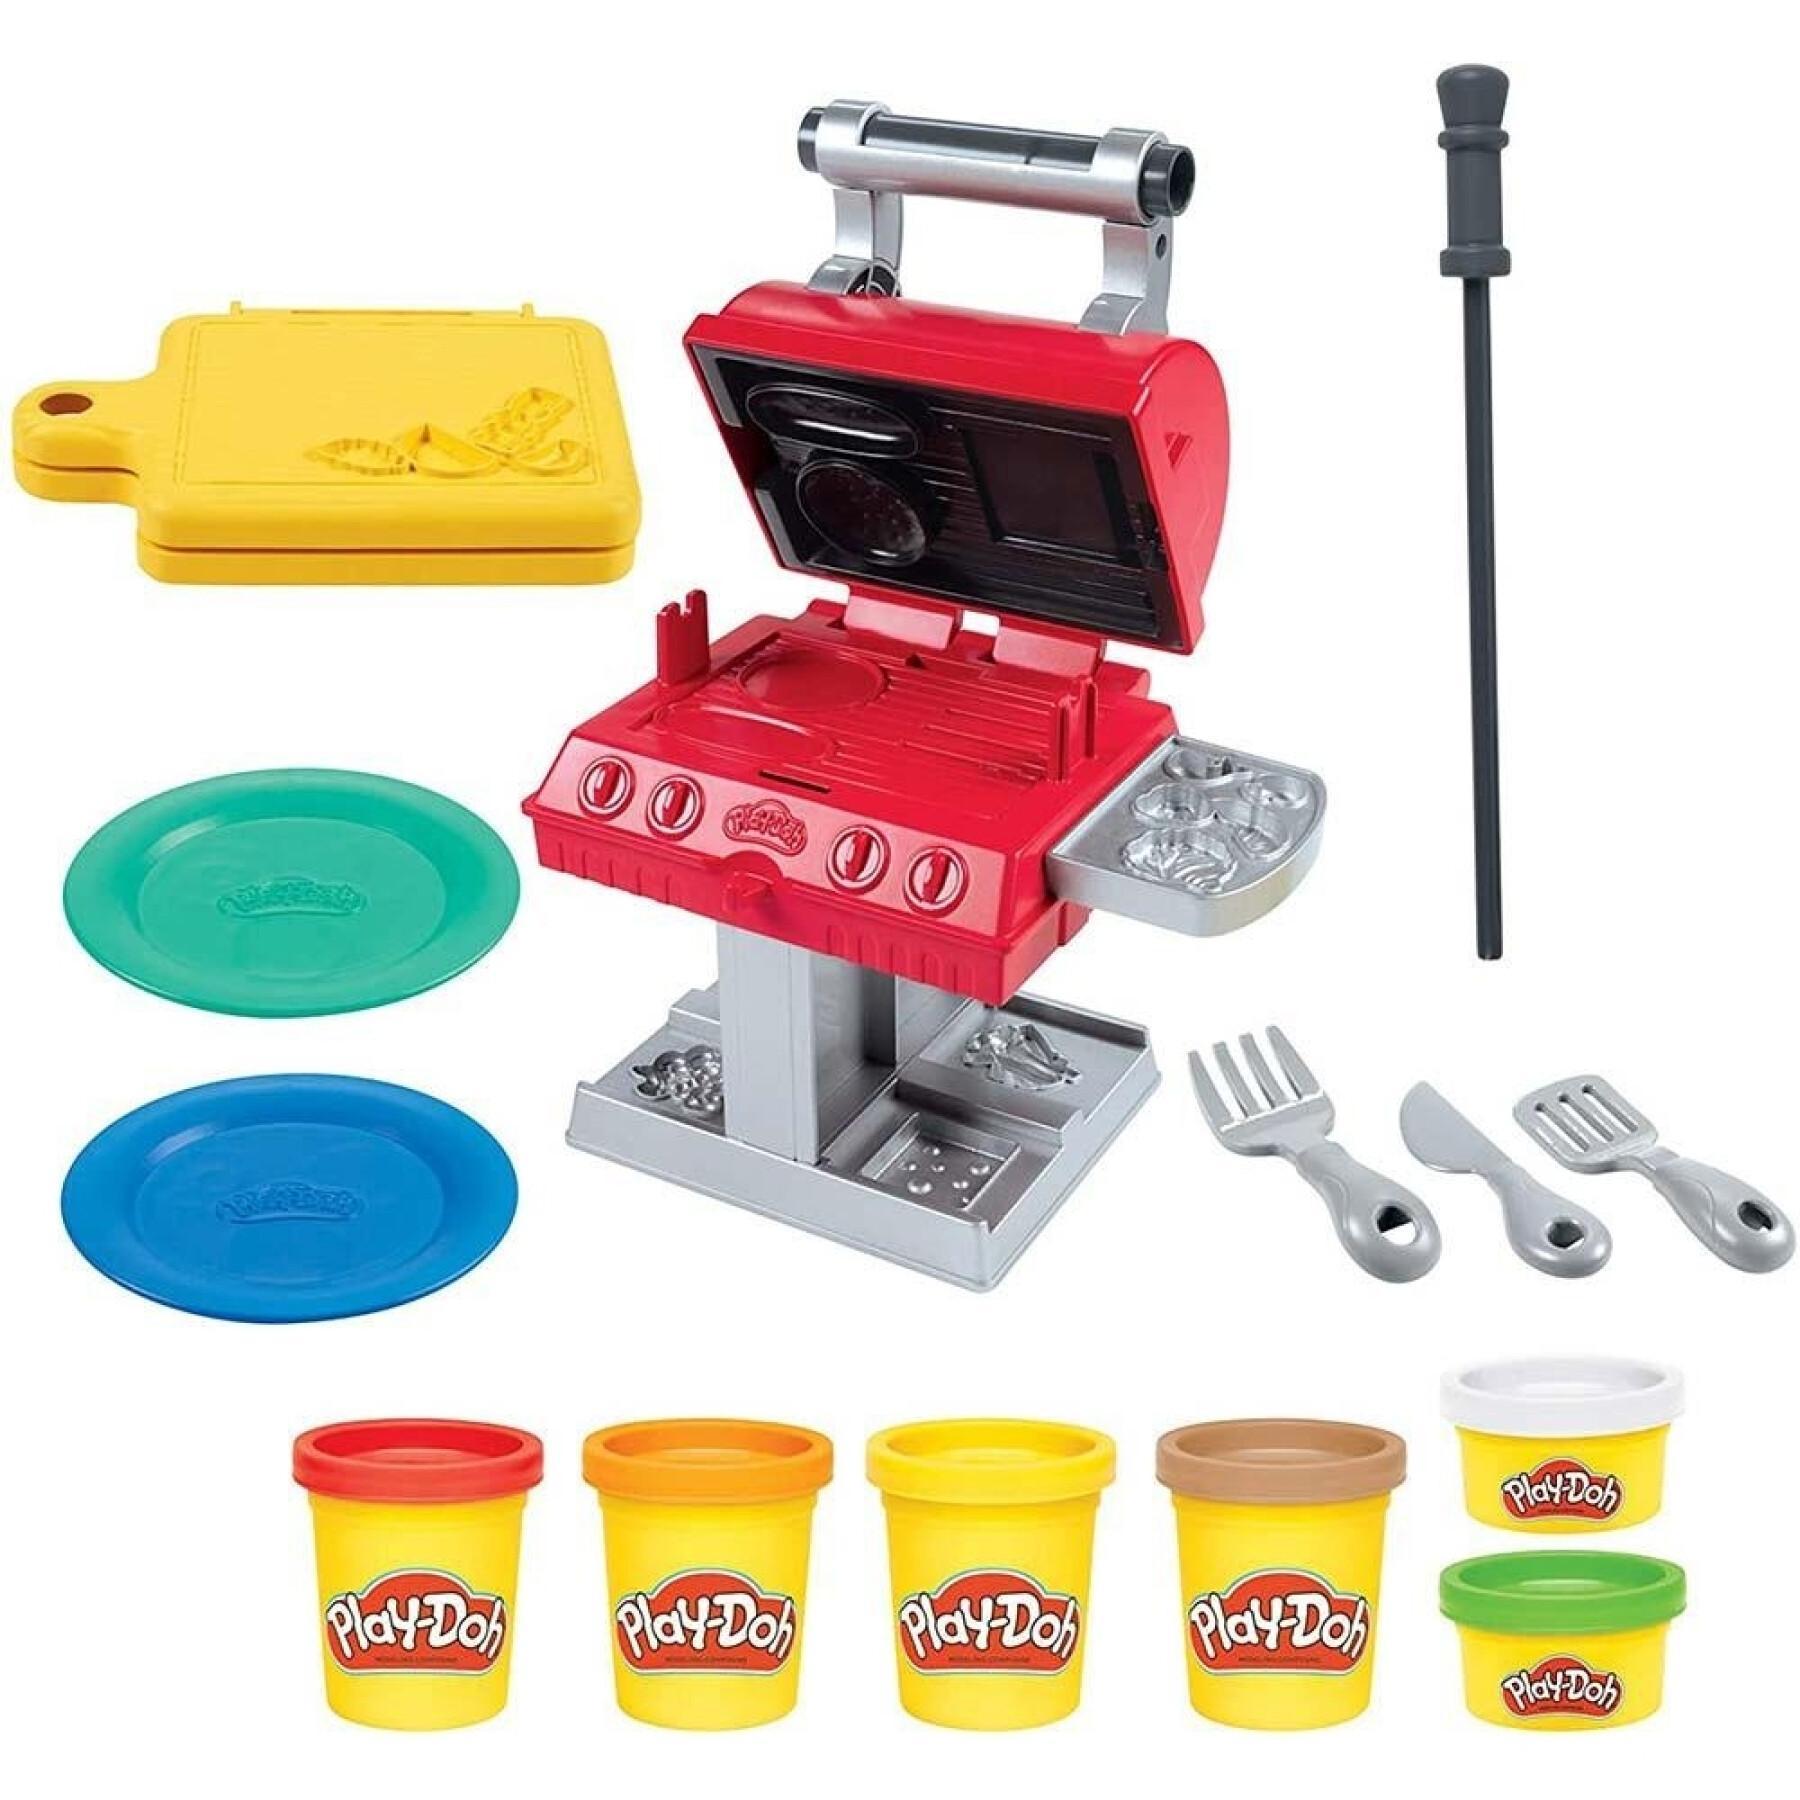 Knete Supergrill Play Doh